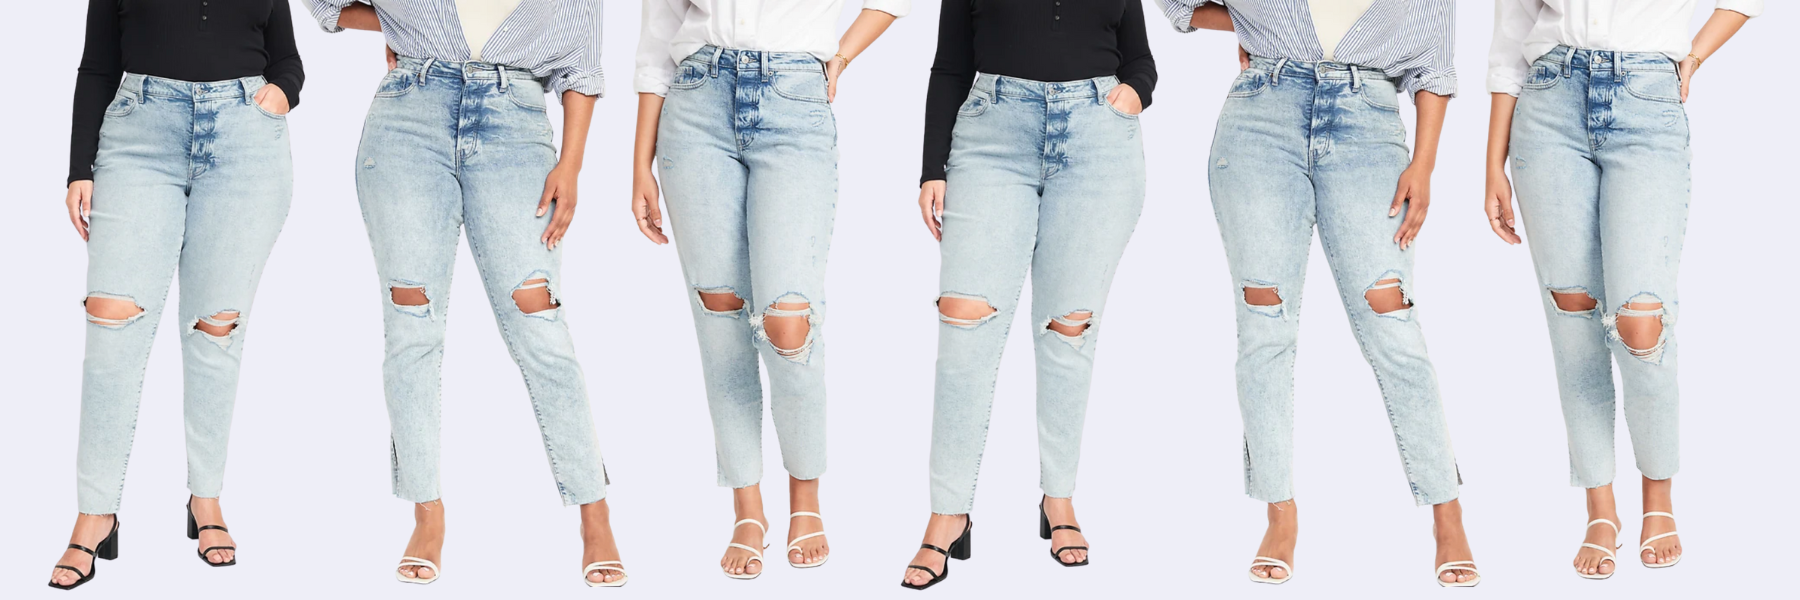 The Old Navy Jeans I *Always* Get DM'ed About - The Birds Papaya